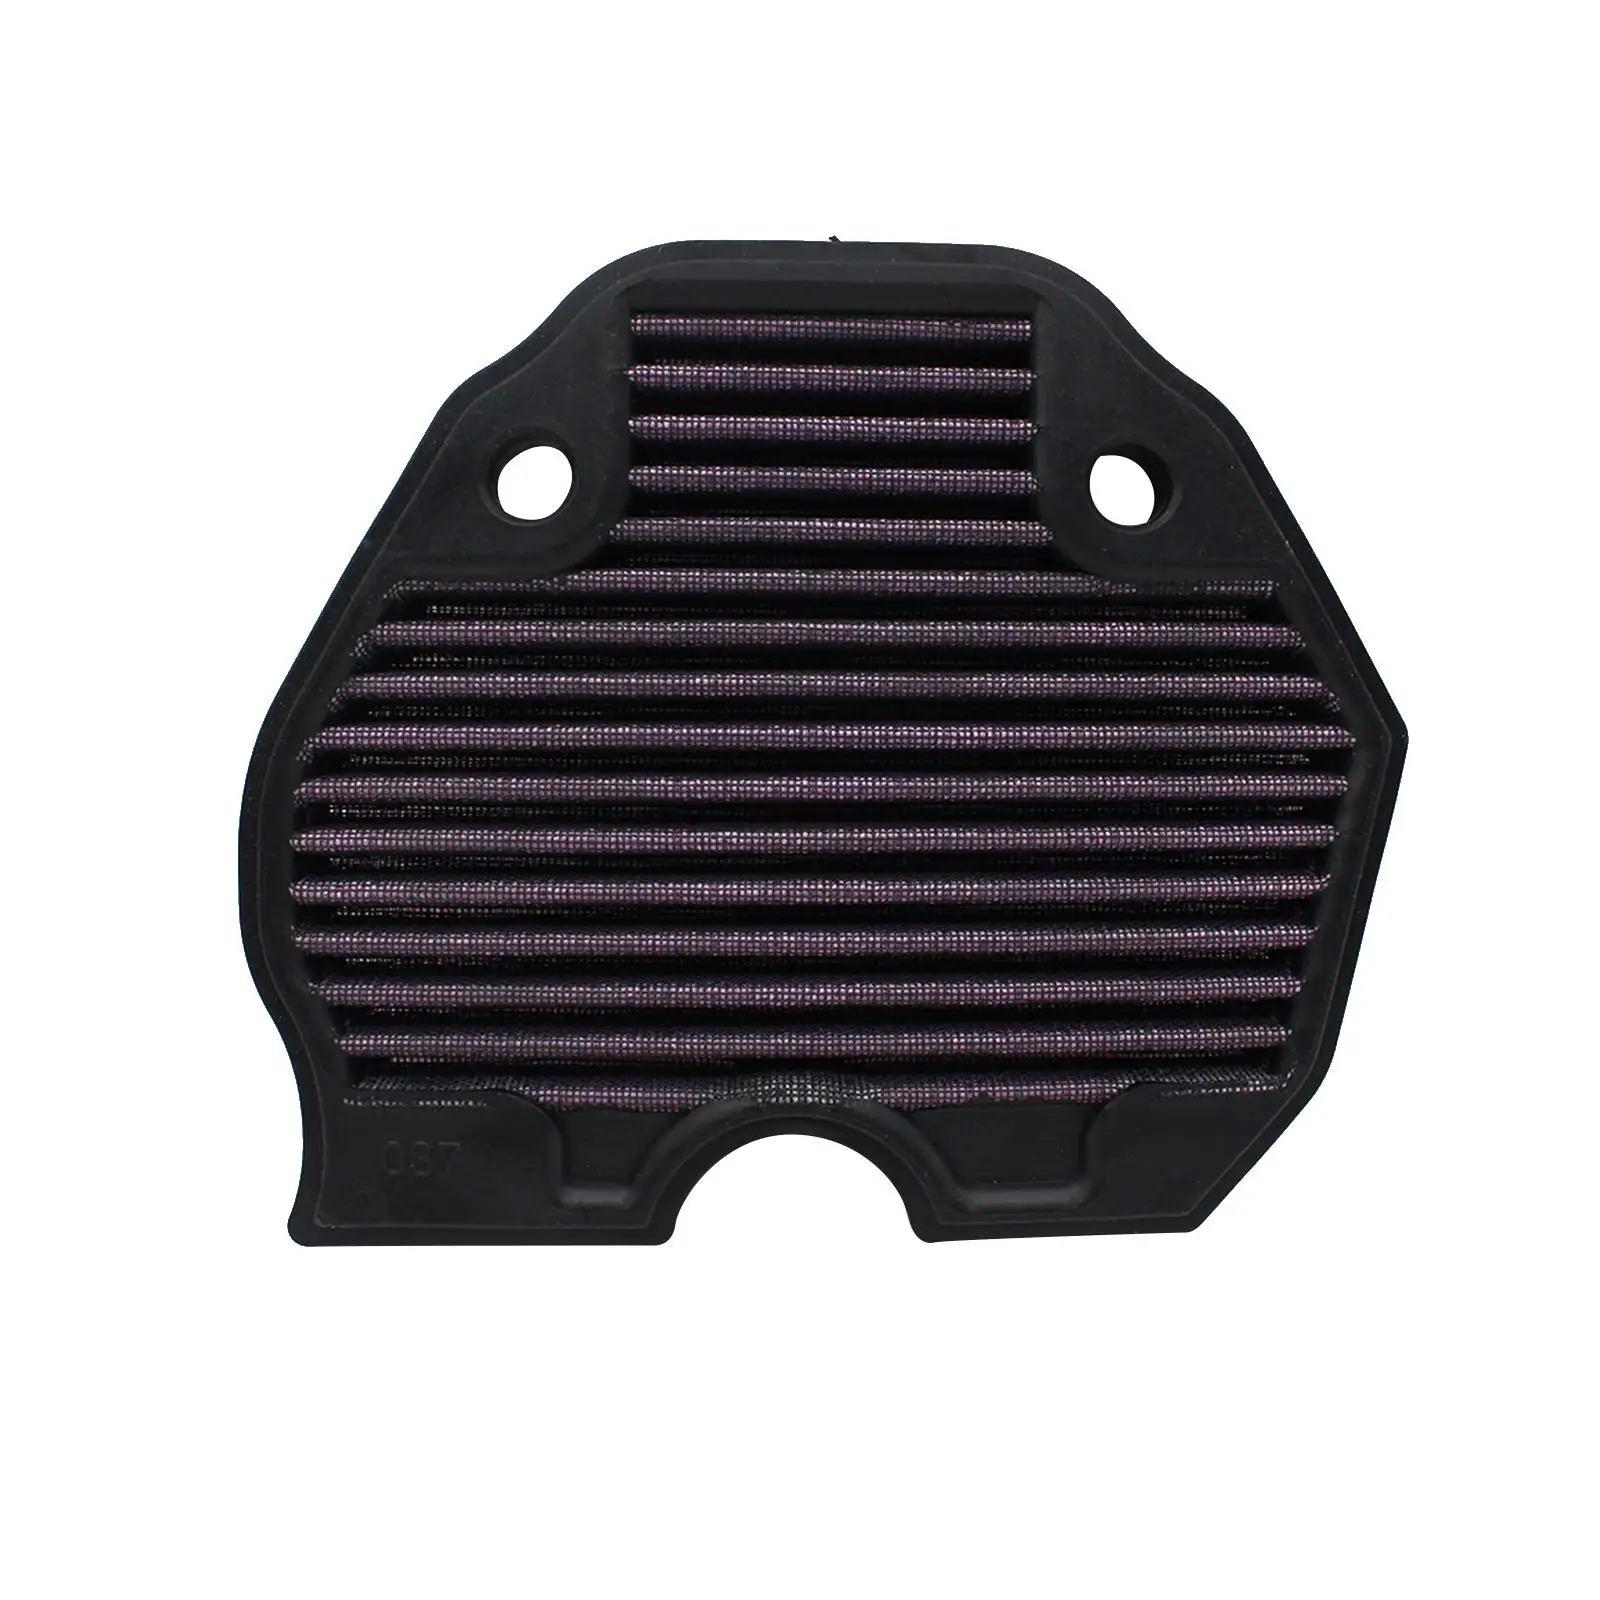 Engine Air Filter Durable Air Cleaner for Benelli BN302 2014 to 2019 BN302R 2017 to 2019 BN302S 2018 to 2019 Replace Parts